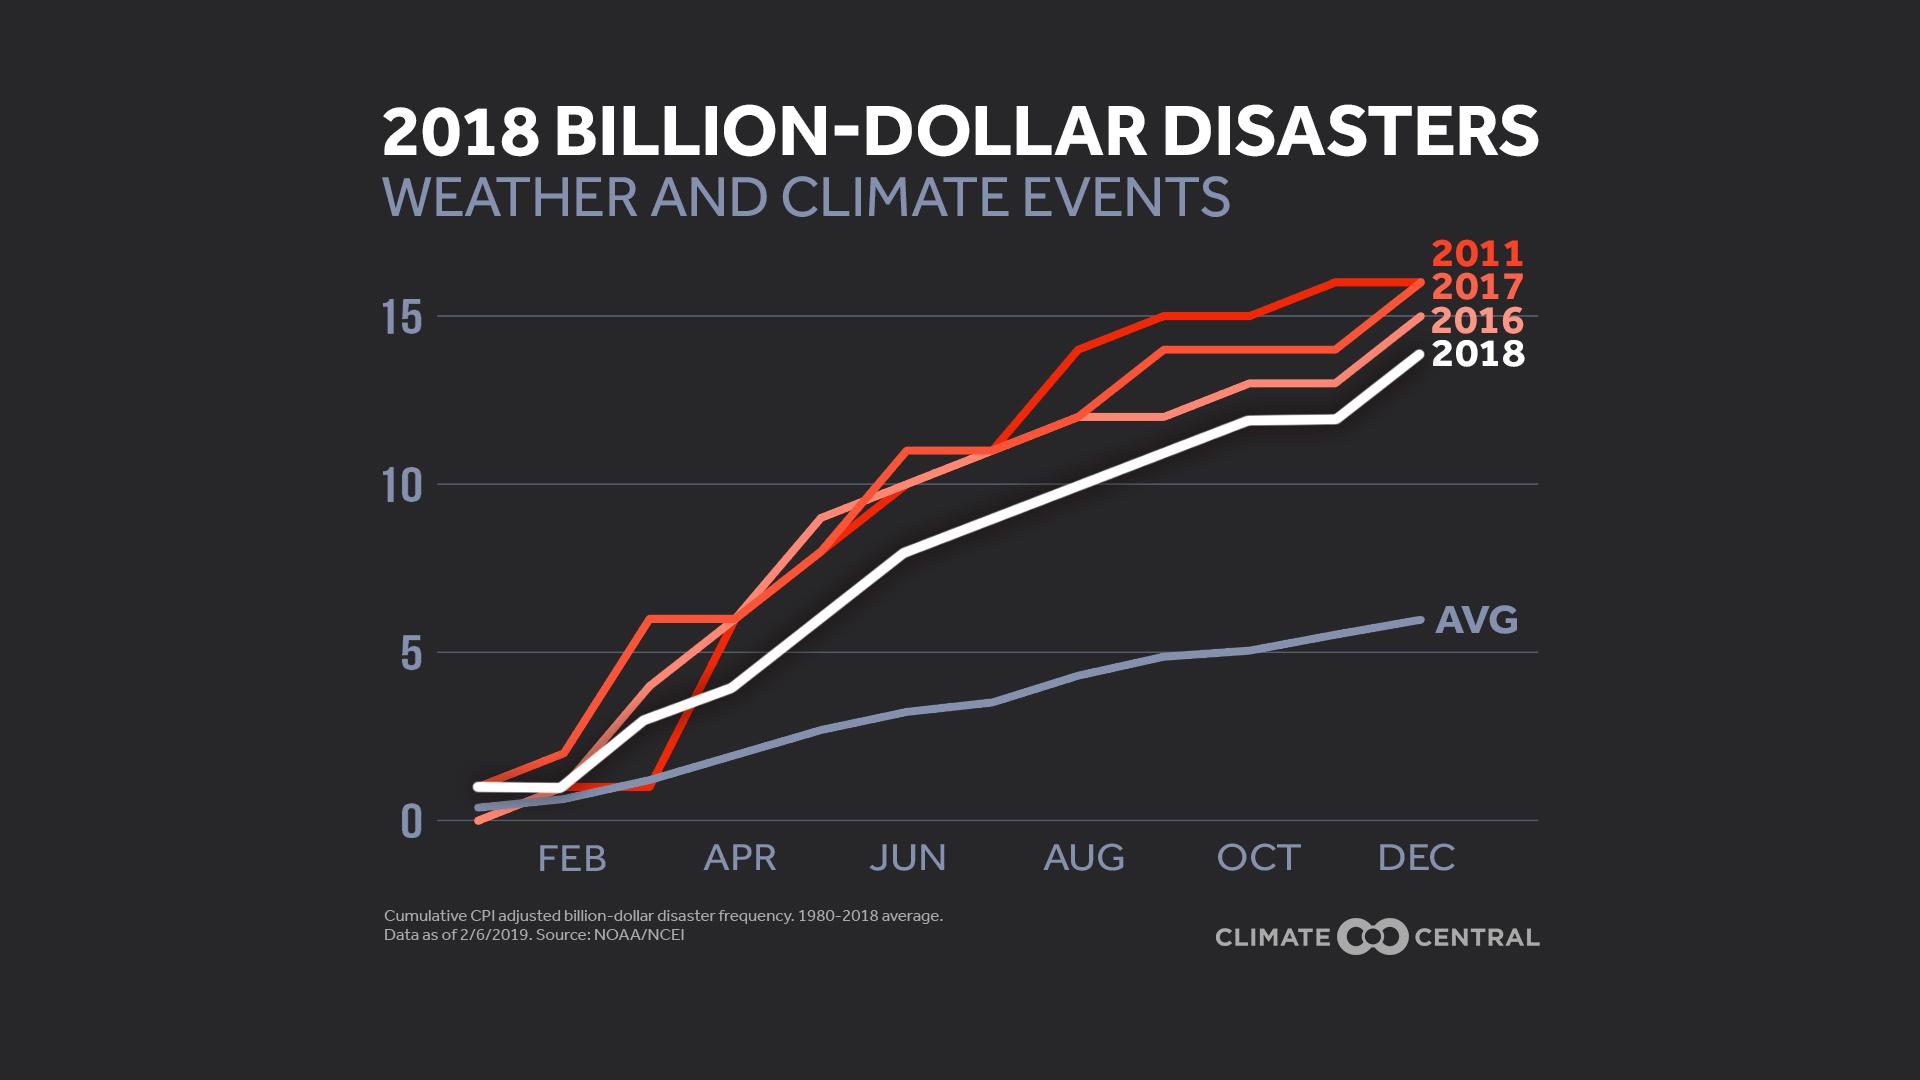 Set 5 - 2018 Year in Review: Temperatures & Billion-Dollar Disasters